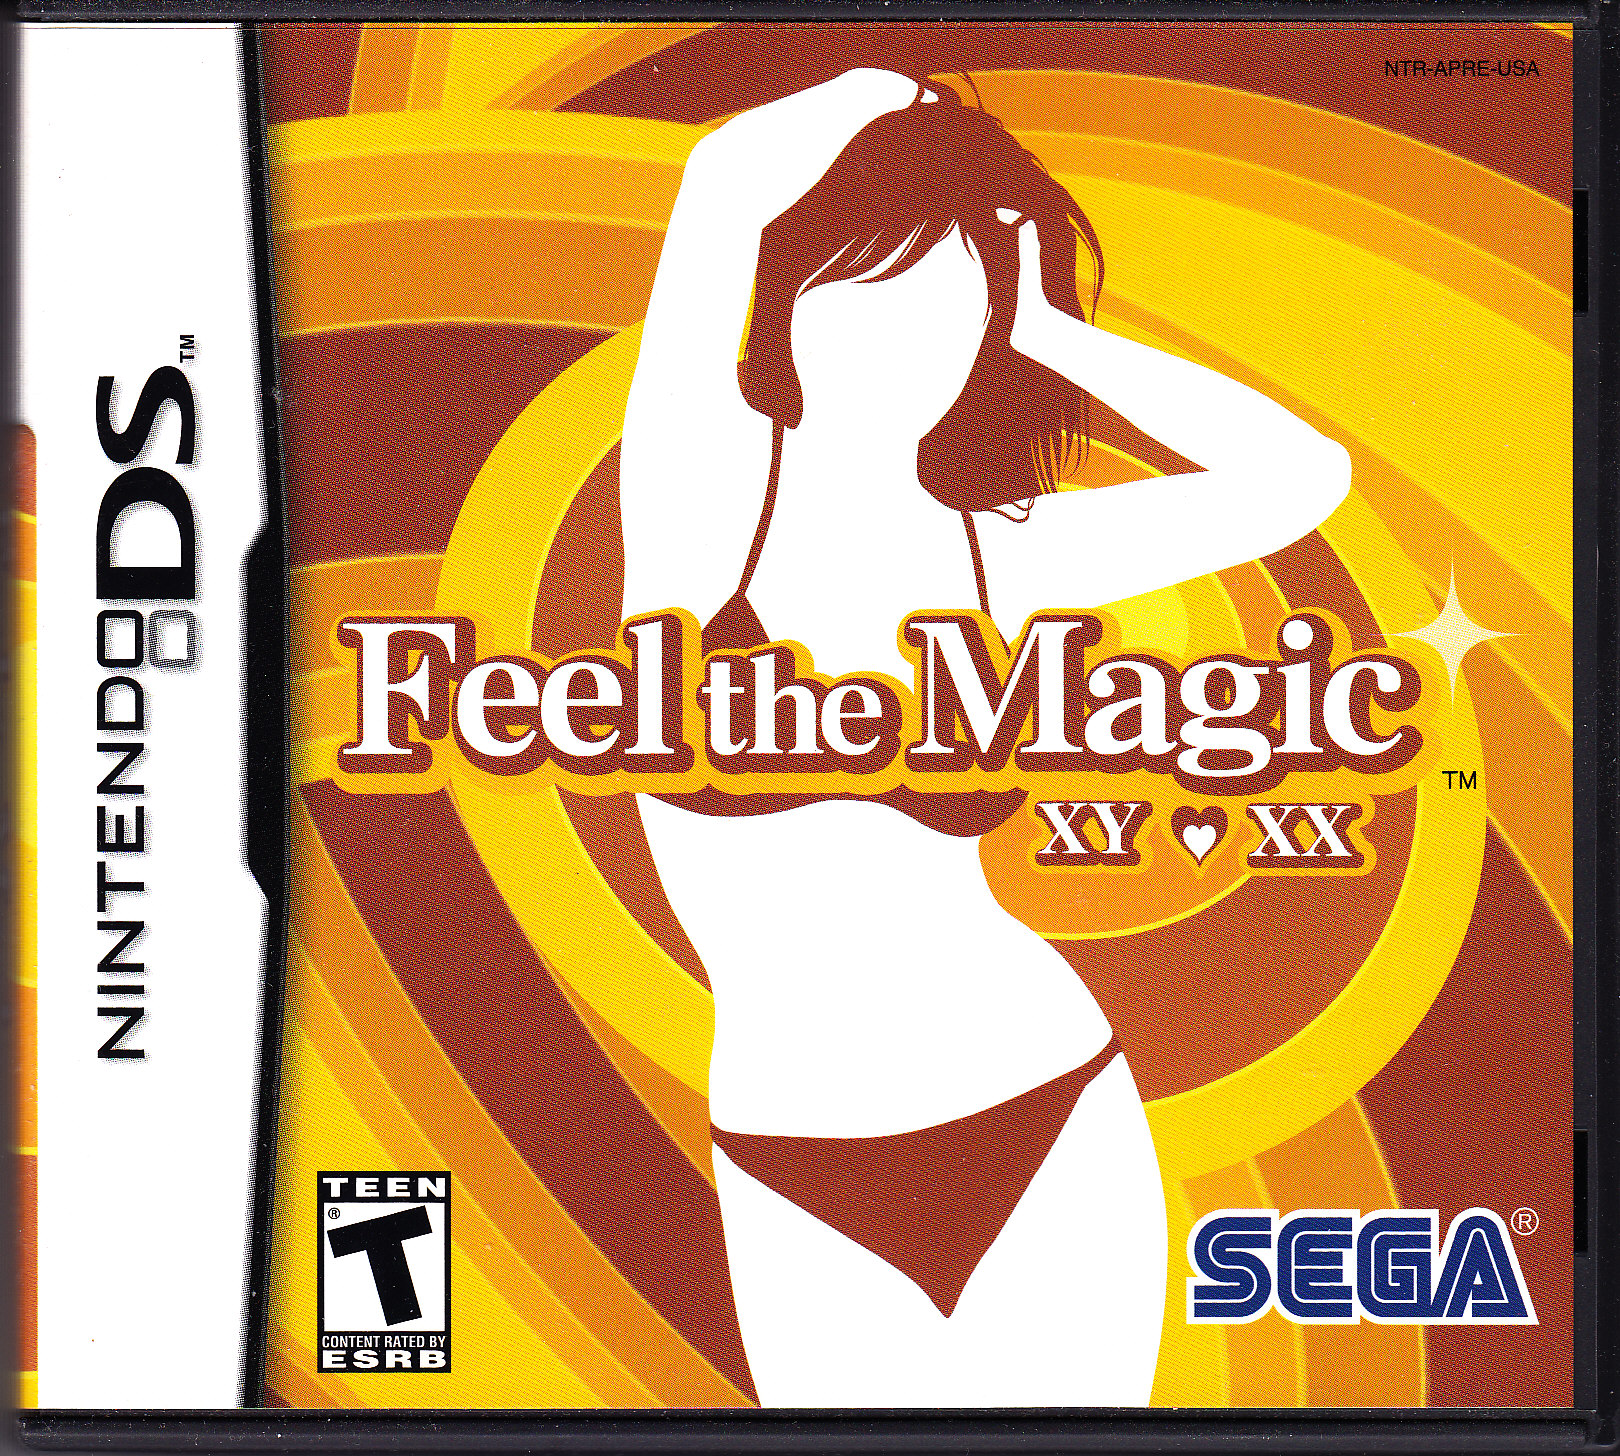 Nintendo%20DS%20Feel%20the%20Magic%20XYXX%20Front%20Cover.jpg